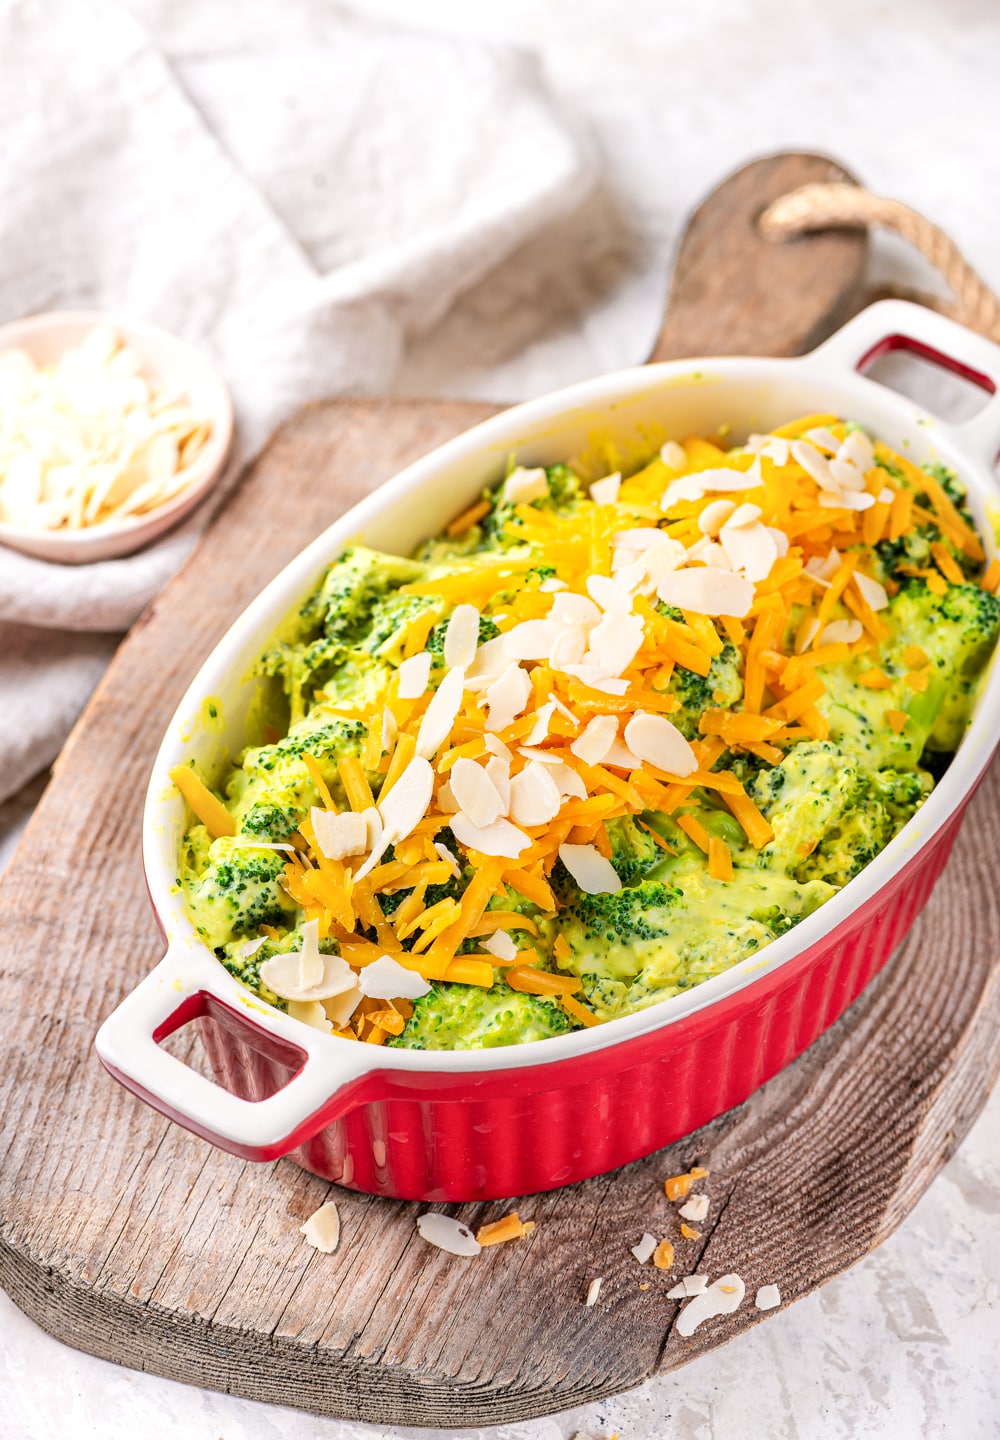 A casserole dish filled with broccoli covered in cheese sauce, and topped with shredded cheddar cheese and sliced almonds.